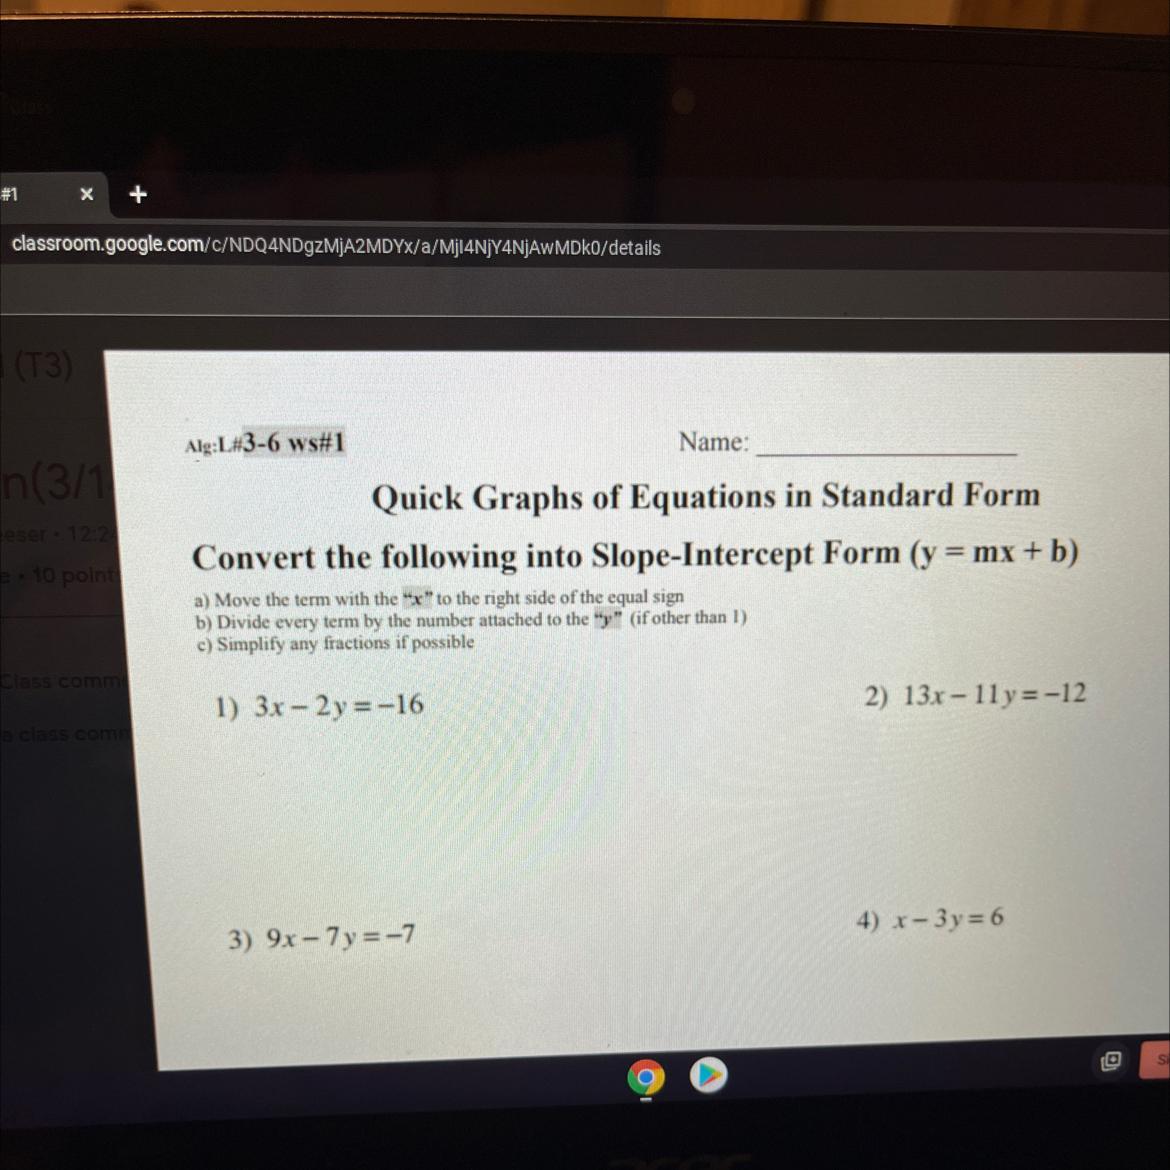 Can You Help Me With Problem #1 I Think I Remember How To Do It But Just Want To Make Sure 